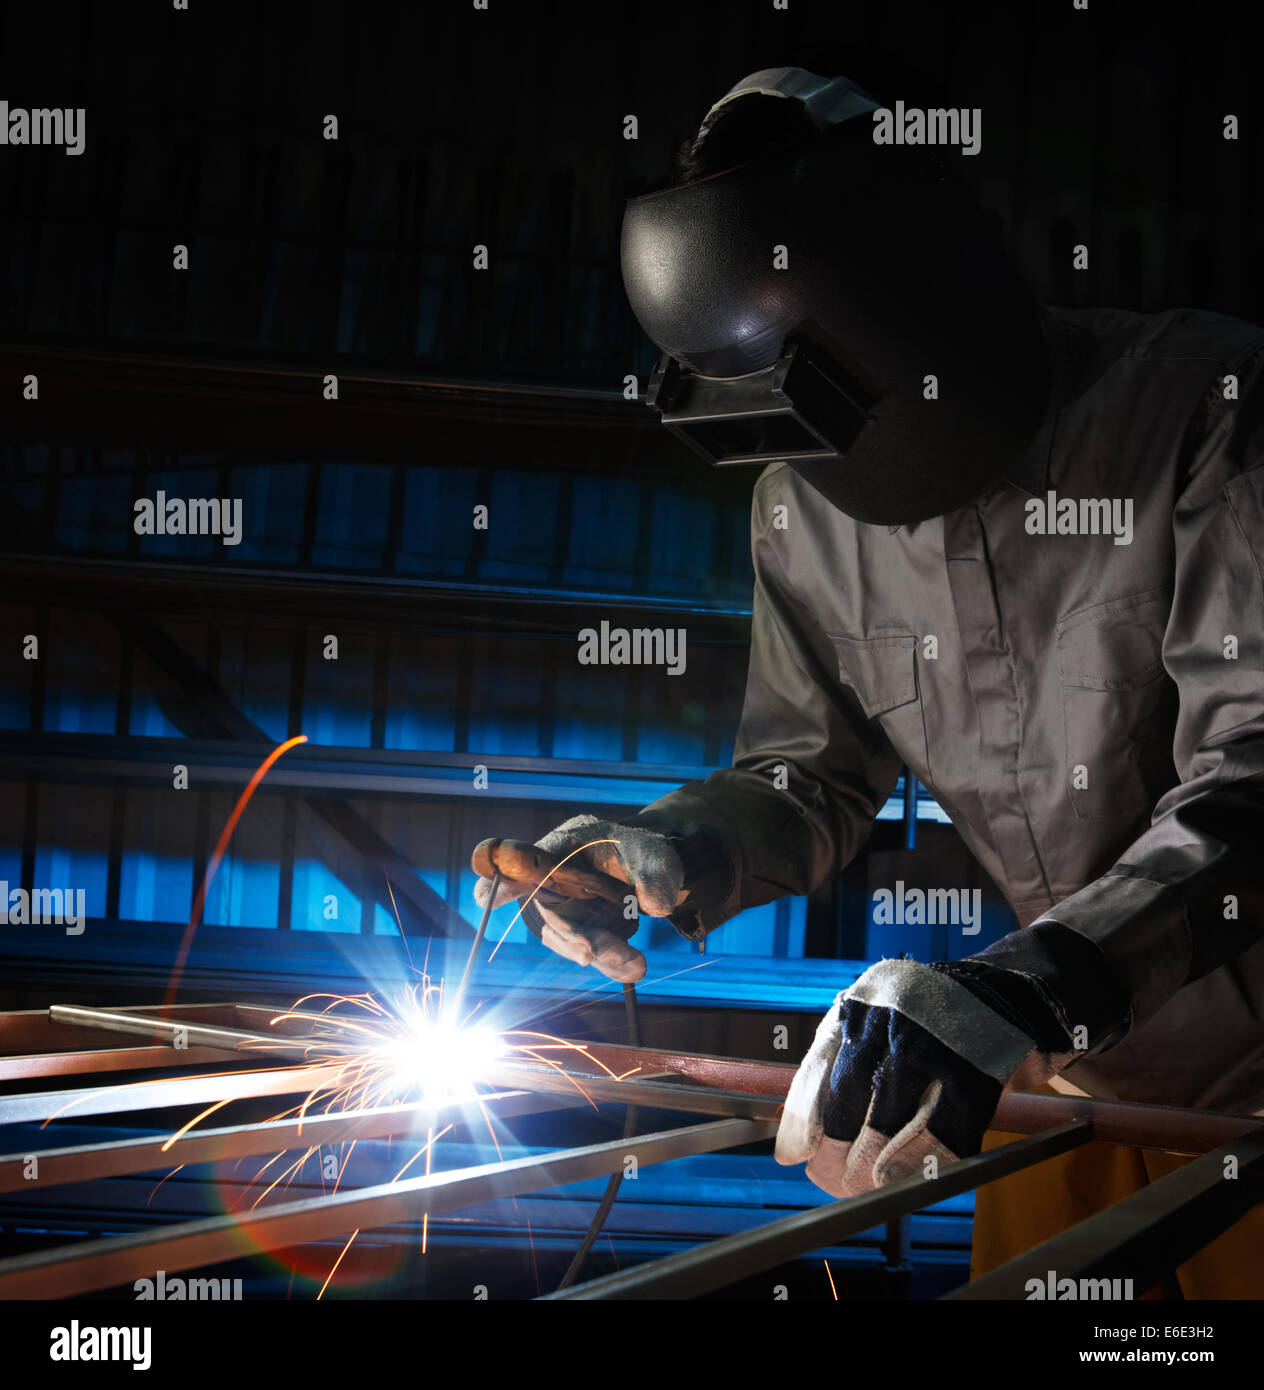 man welding in workshop with safety precaution Stock Photo